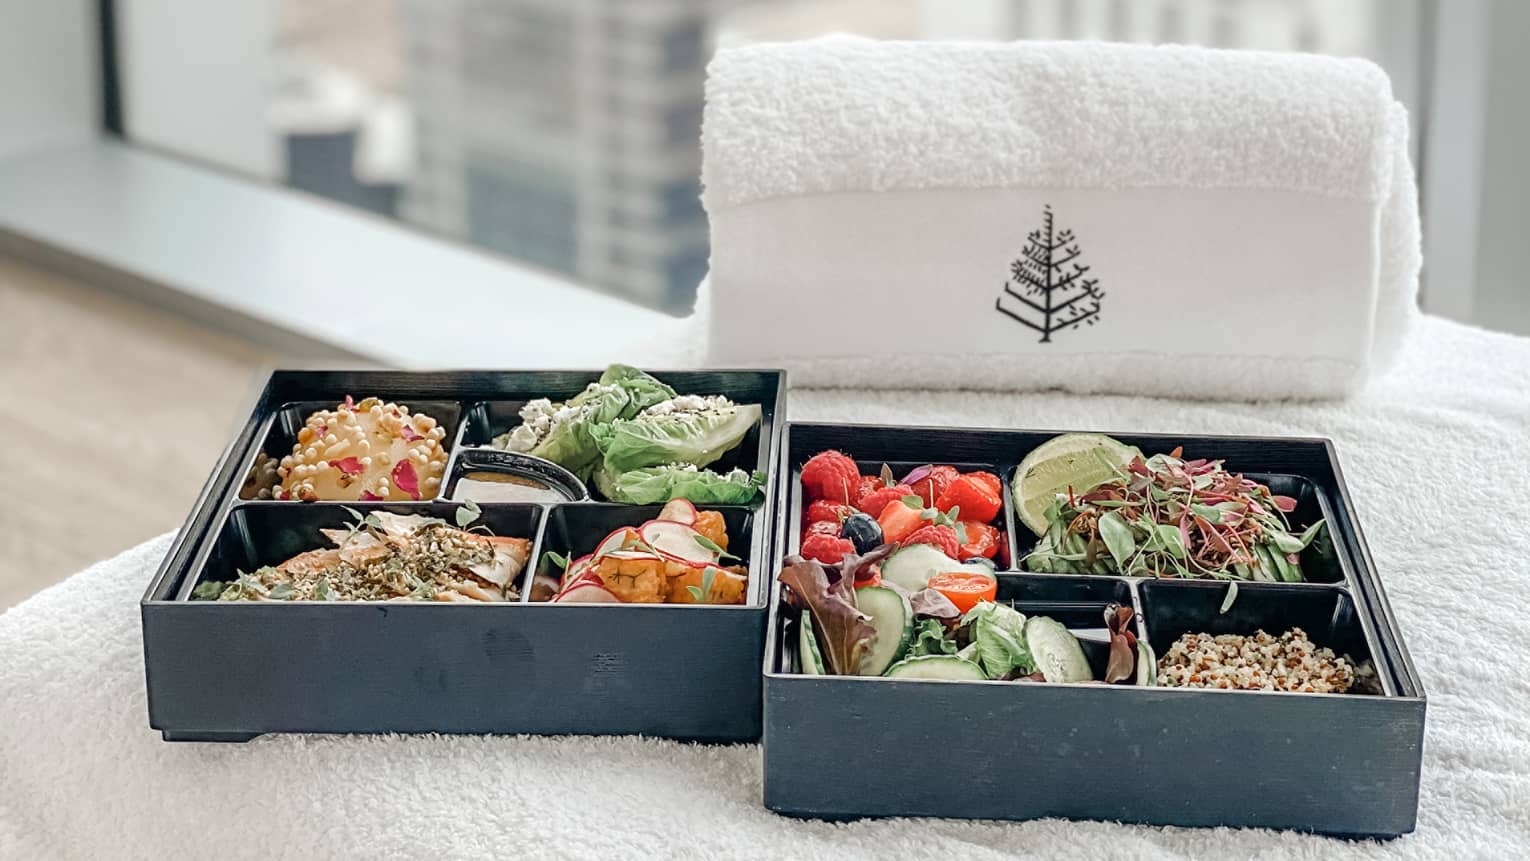 Two bento box lunches with vegetables, rice, and salad on a towel near a window looking at a tall building.